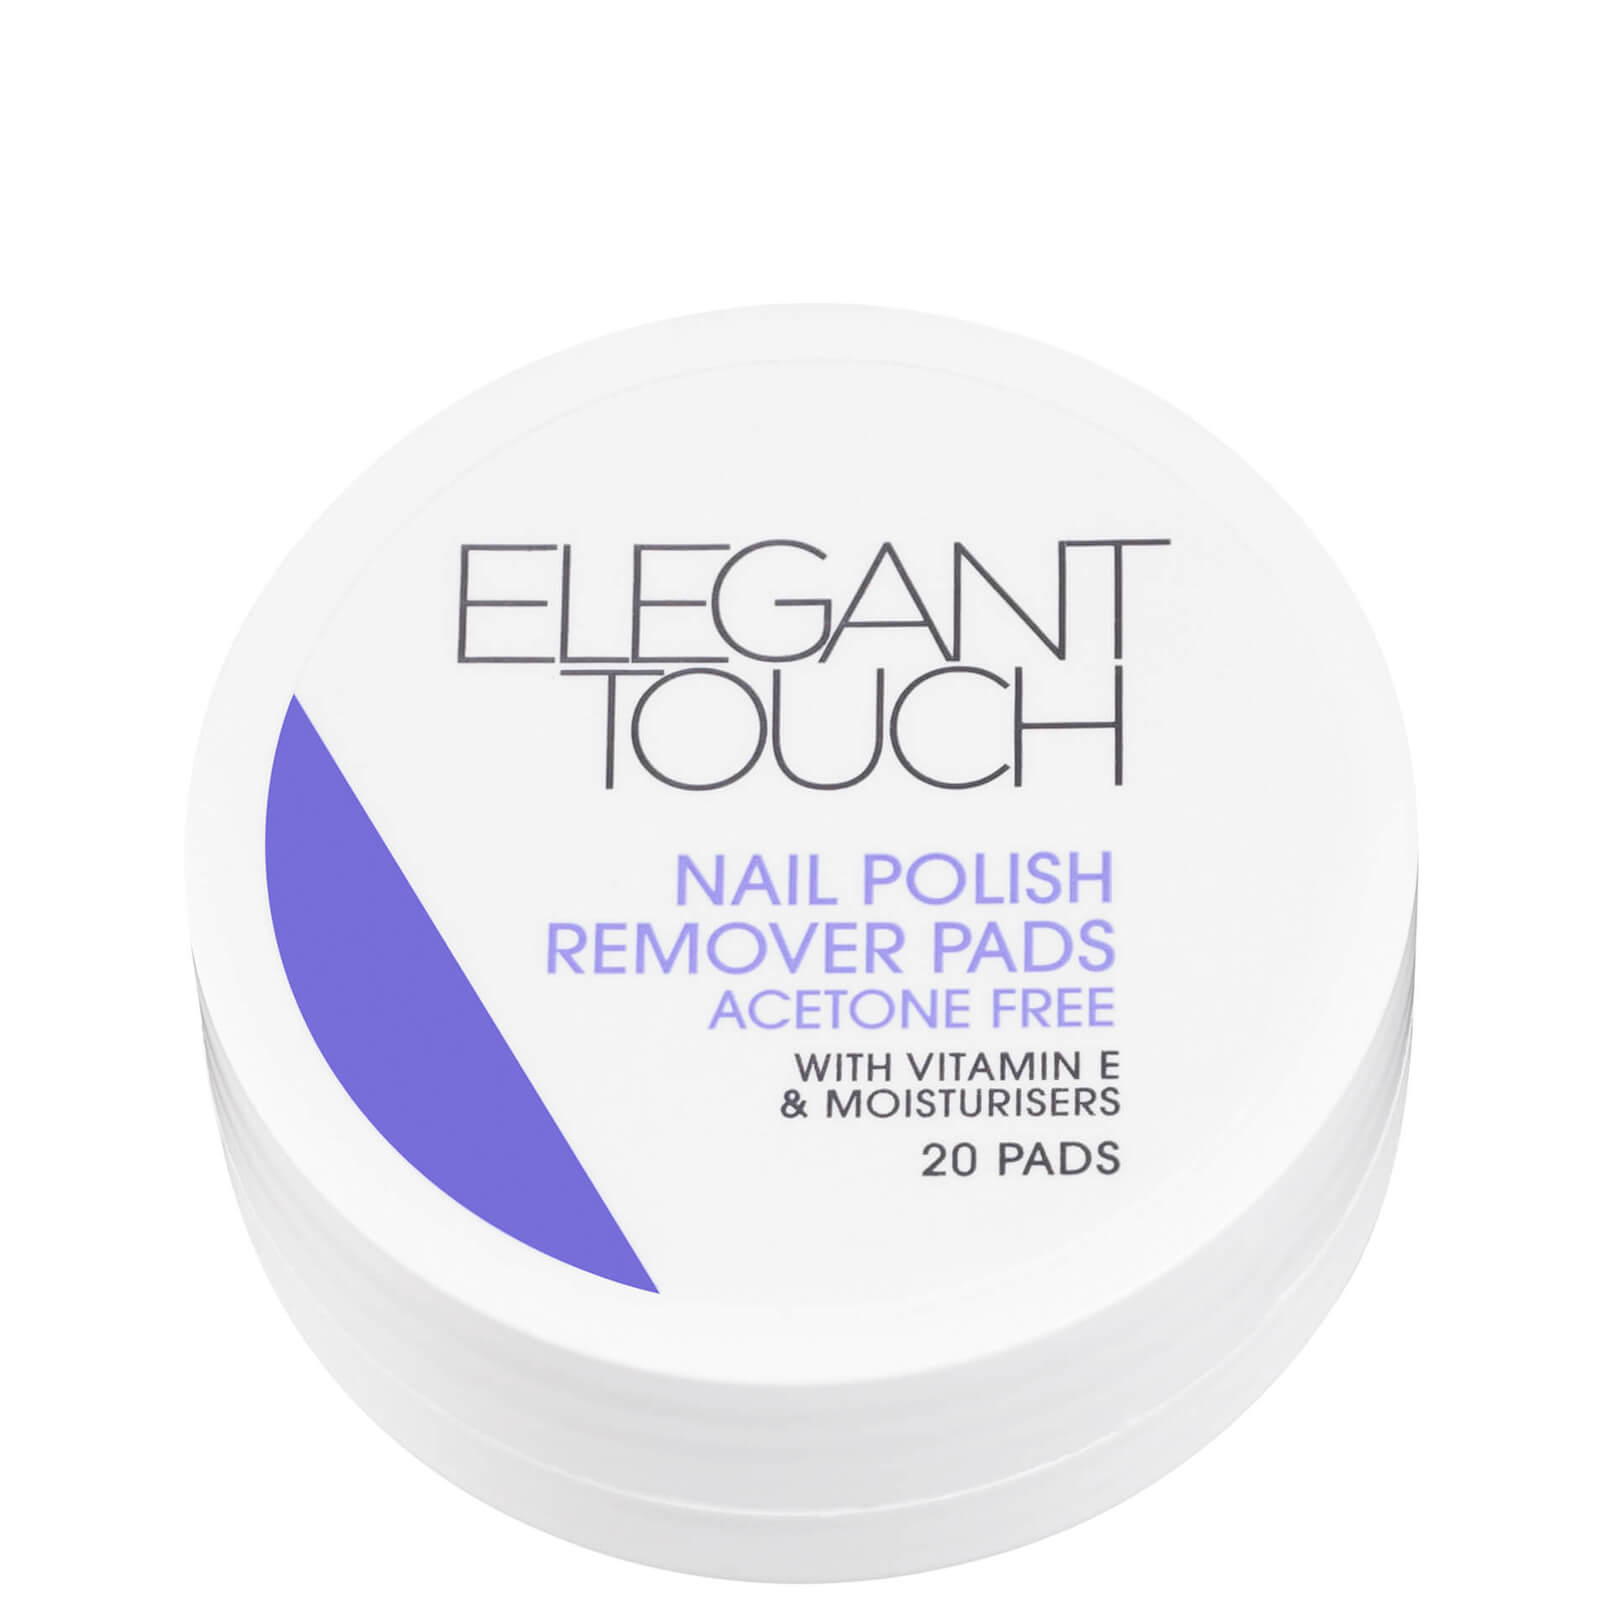 Elegant Touch Nail Polish Remover Pads (20 Pads)